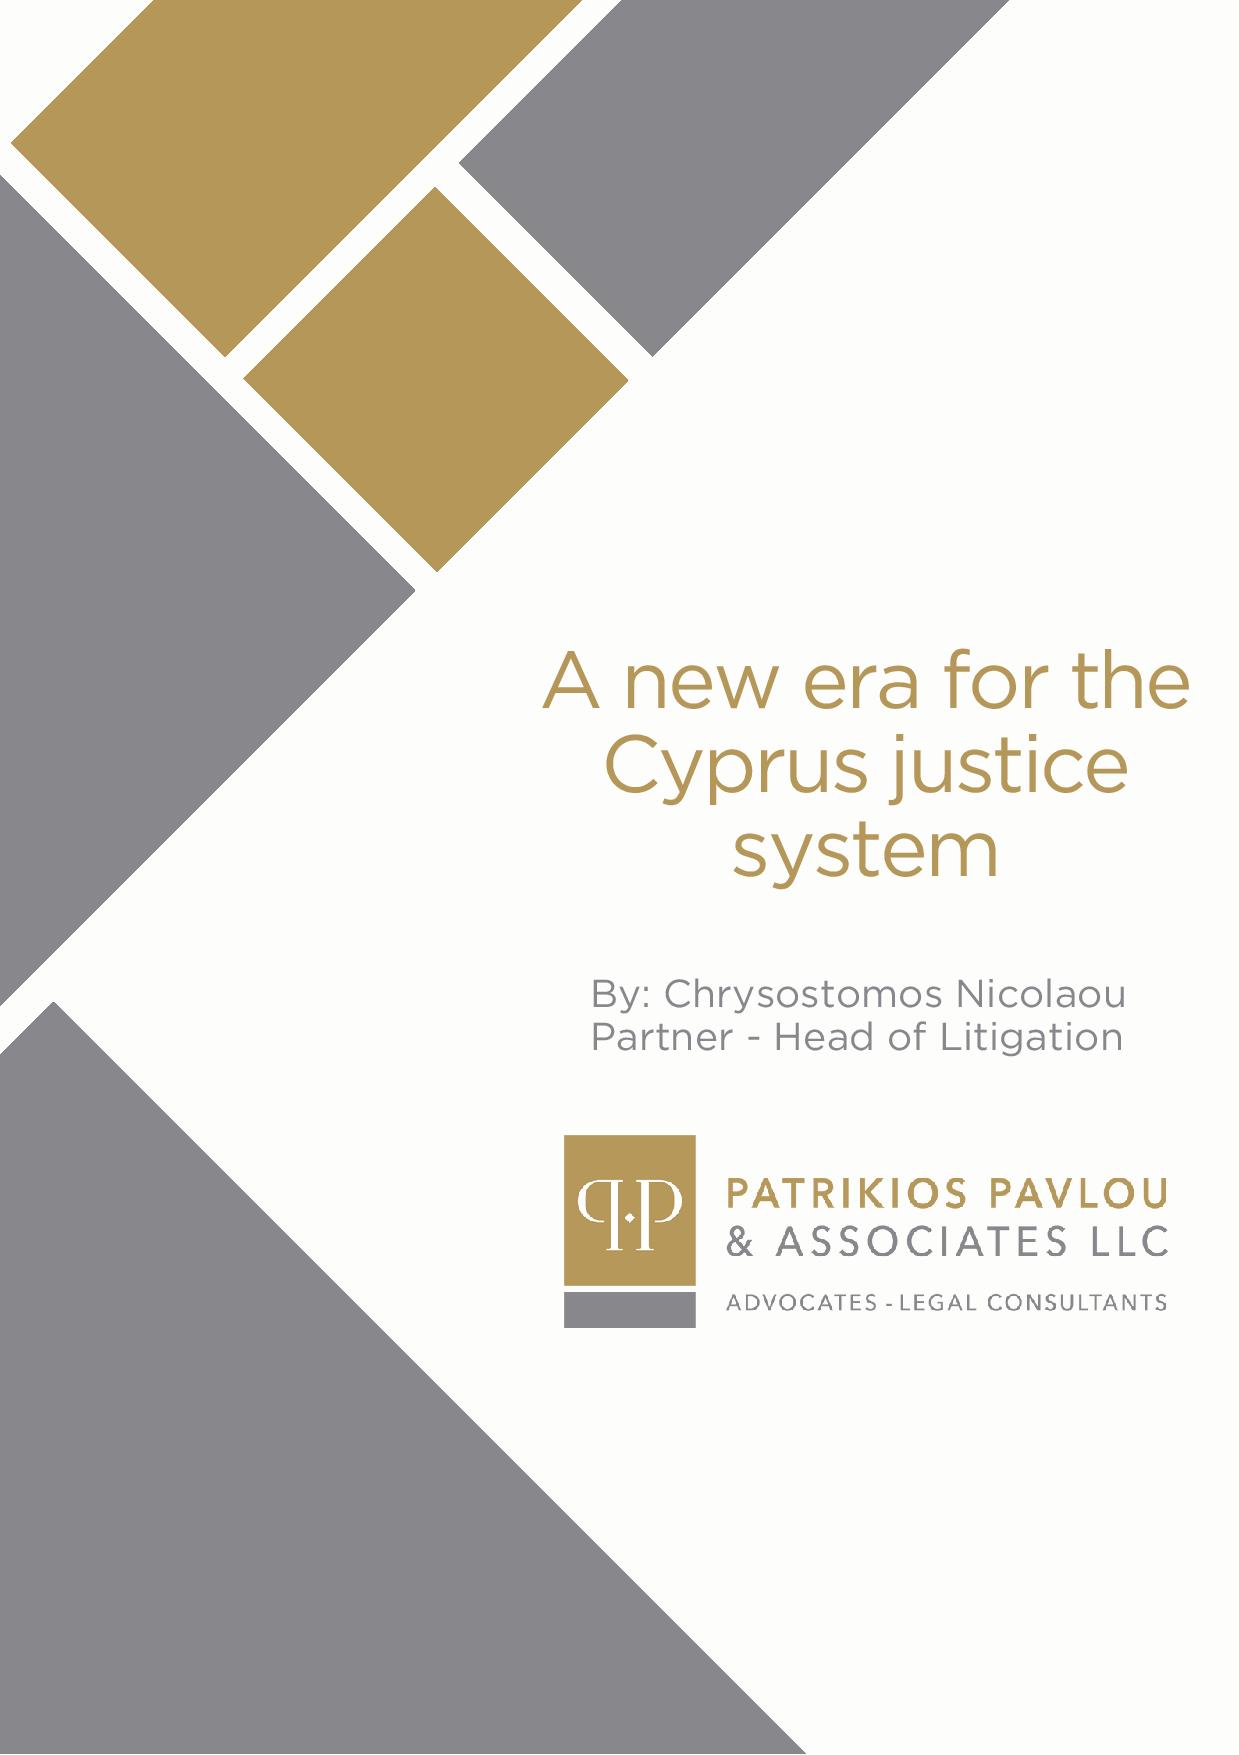 A new era for the Cyprus justice system